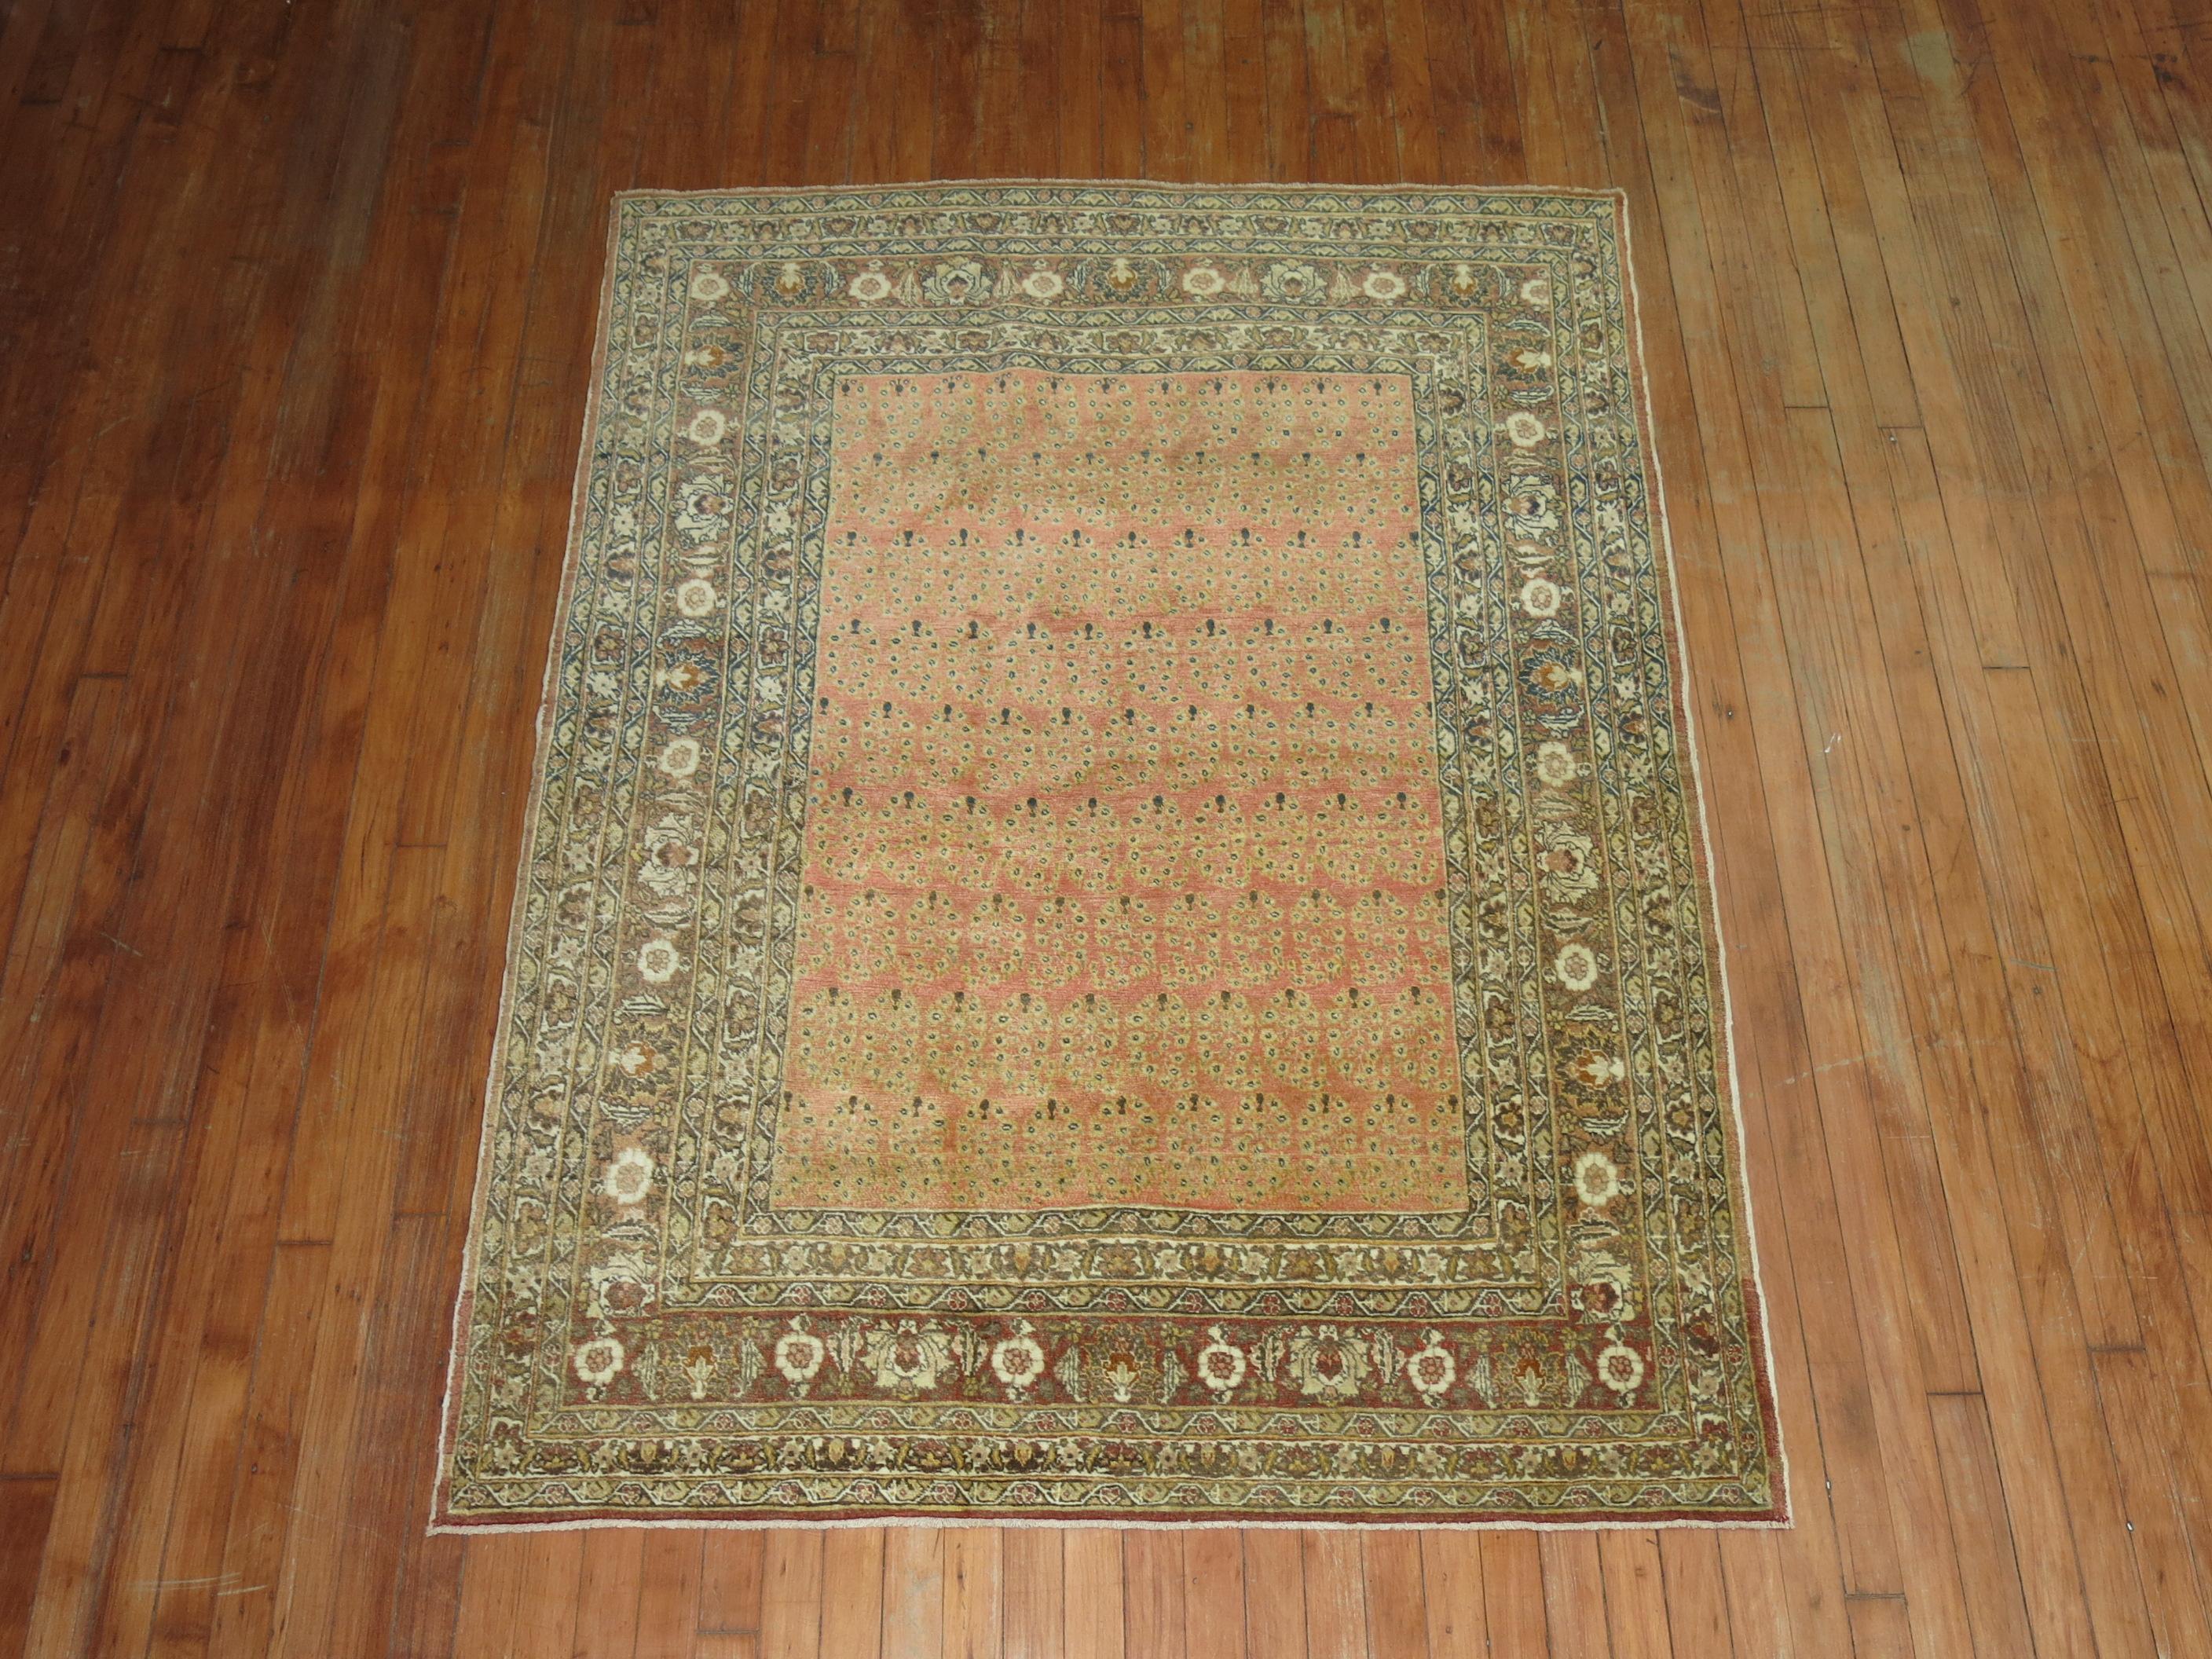 A remarkable late 19th-century Persian Tabriz rug woven by Hadji Jalili workshop in the city of Tabriz. 

4'6'' x 5'11''

The name of the master weaver, Hadji Jallili, lives on as perhaps the single most important creator of unique Court design